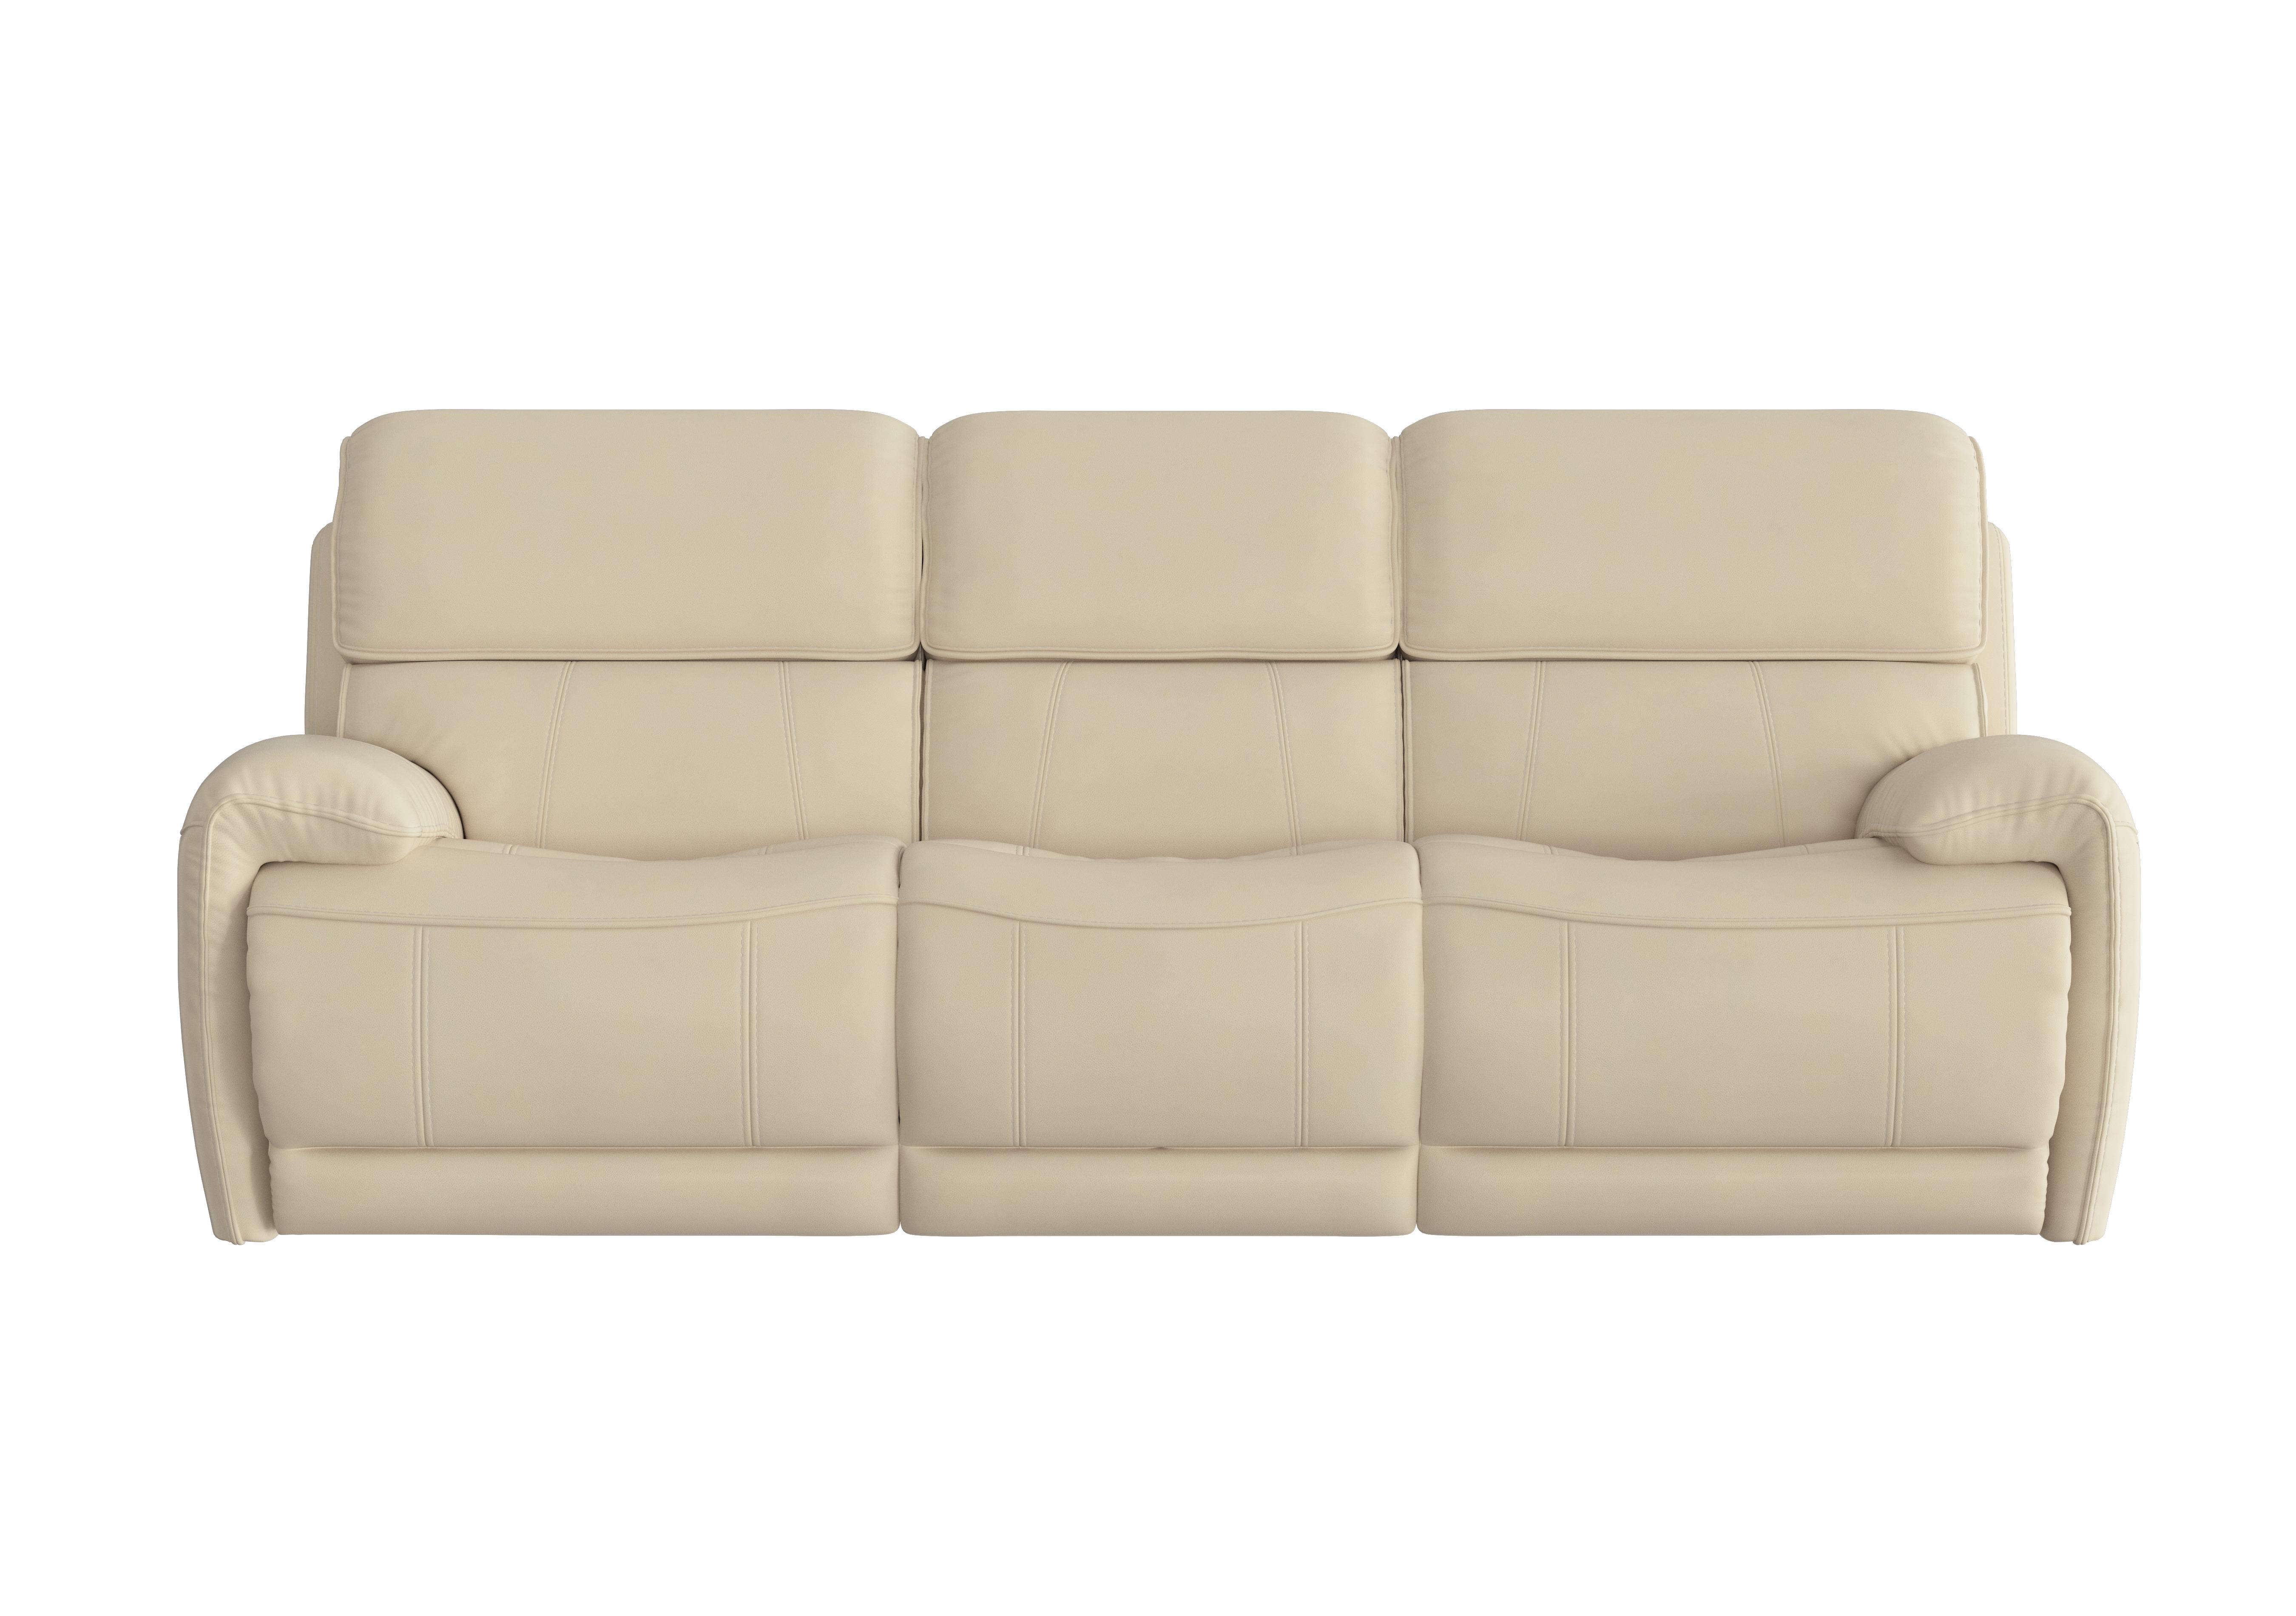 Link 3 Seater Leather Power Recliner Sofa with Power Headrests in Bv-862c Bisque on Furniture Village